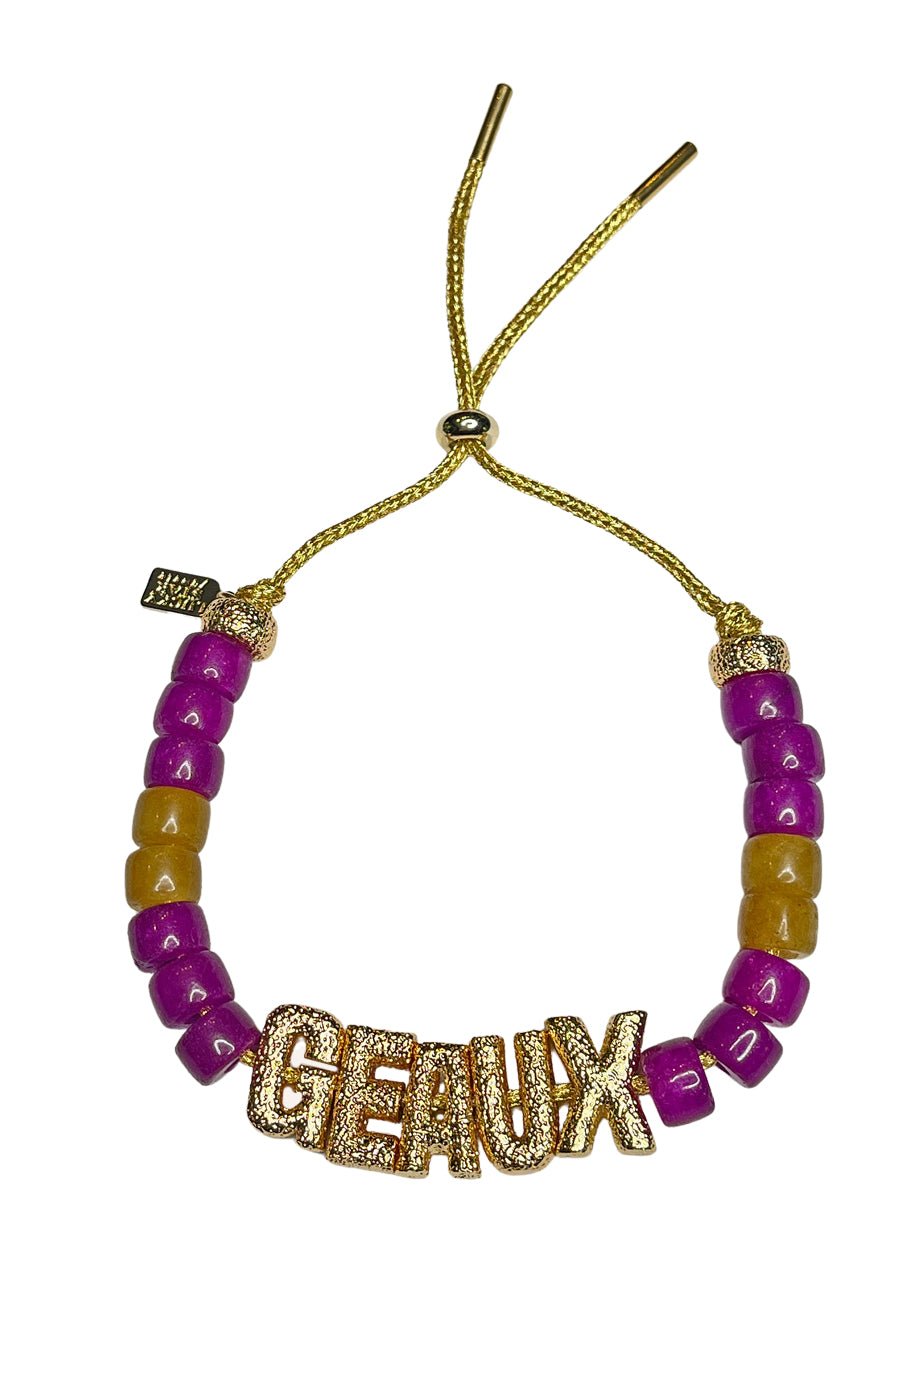 Purple + Gold Eye Candy "Geaux" ID Bracelet - Lucky Star Jewels - Color Game